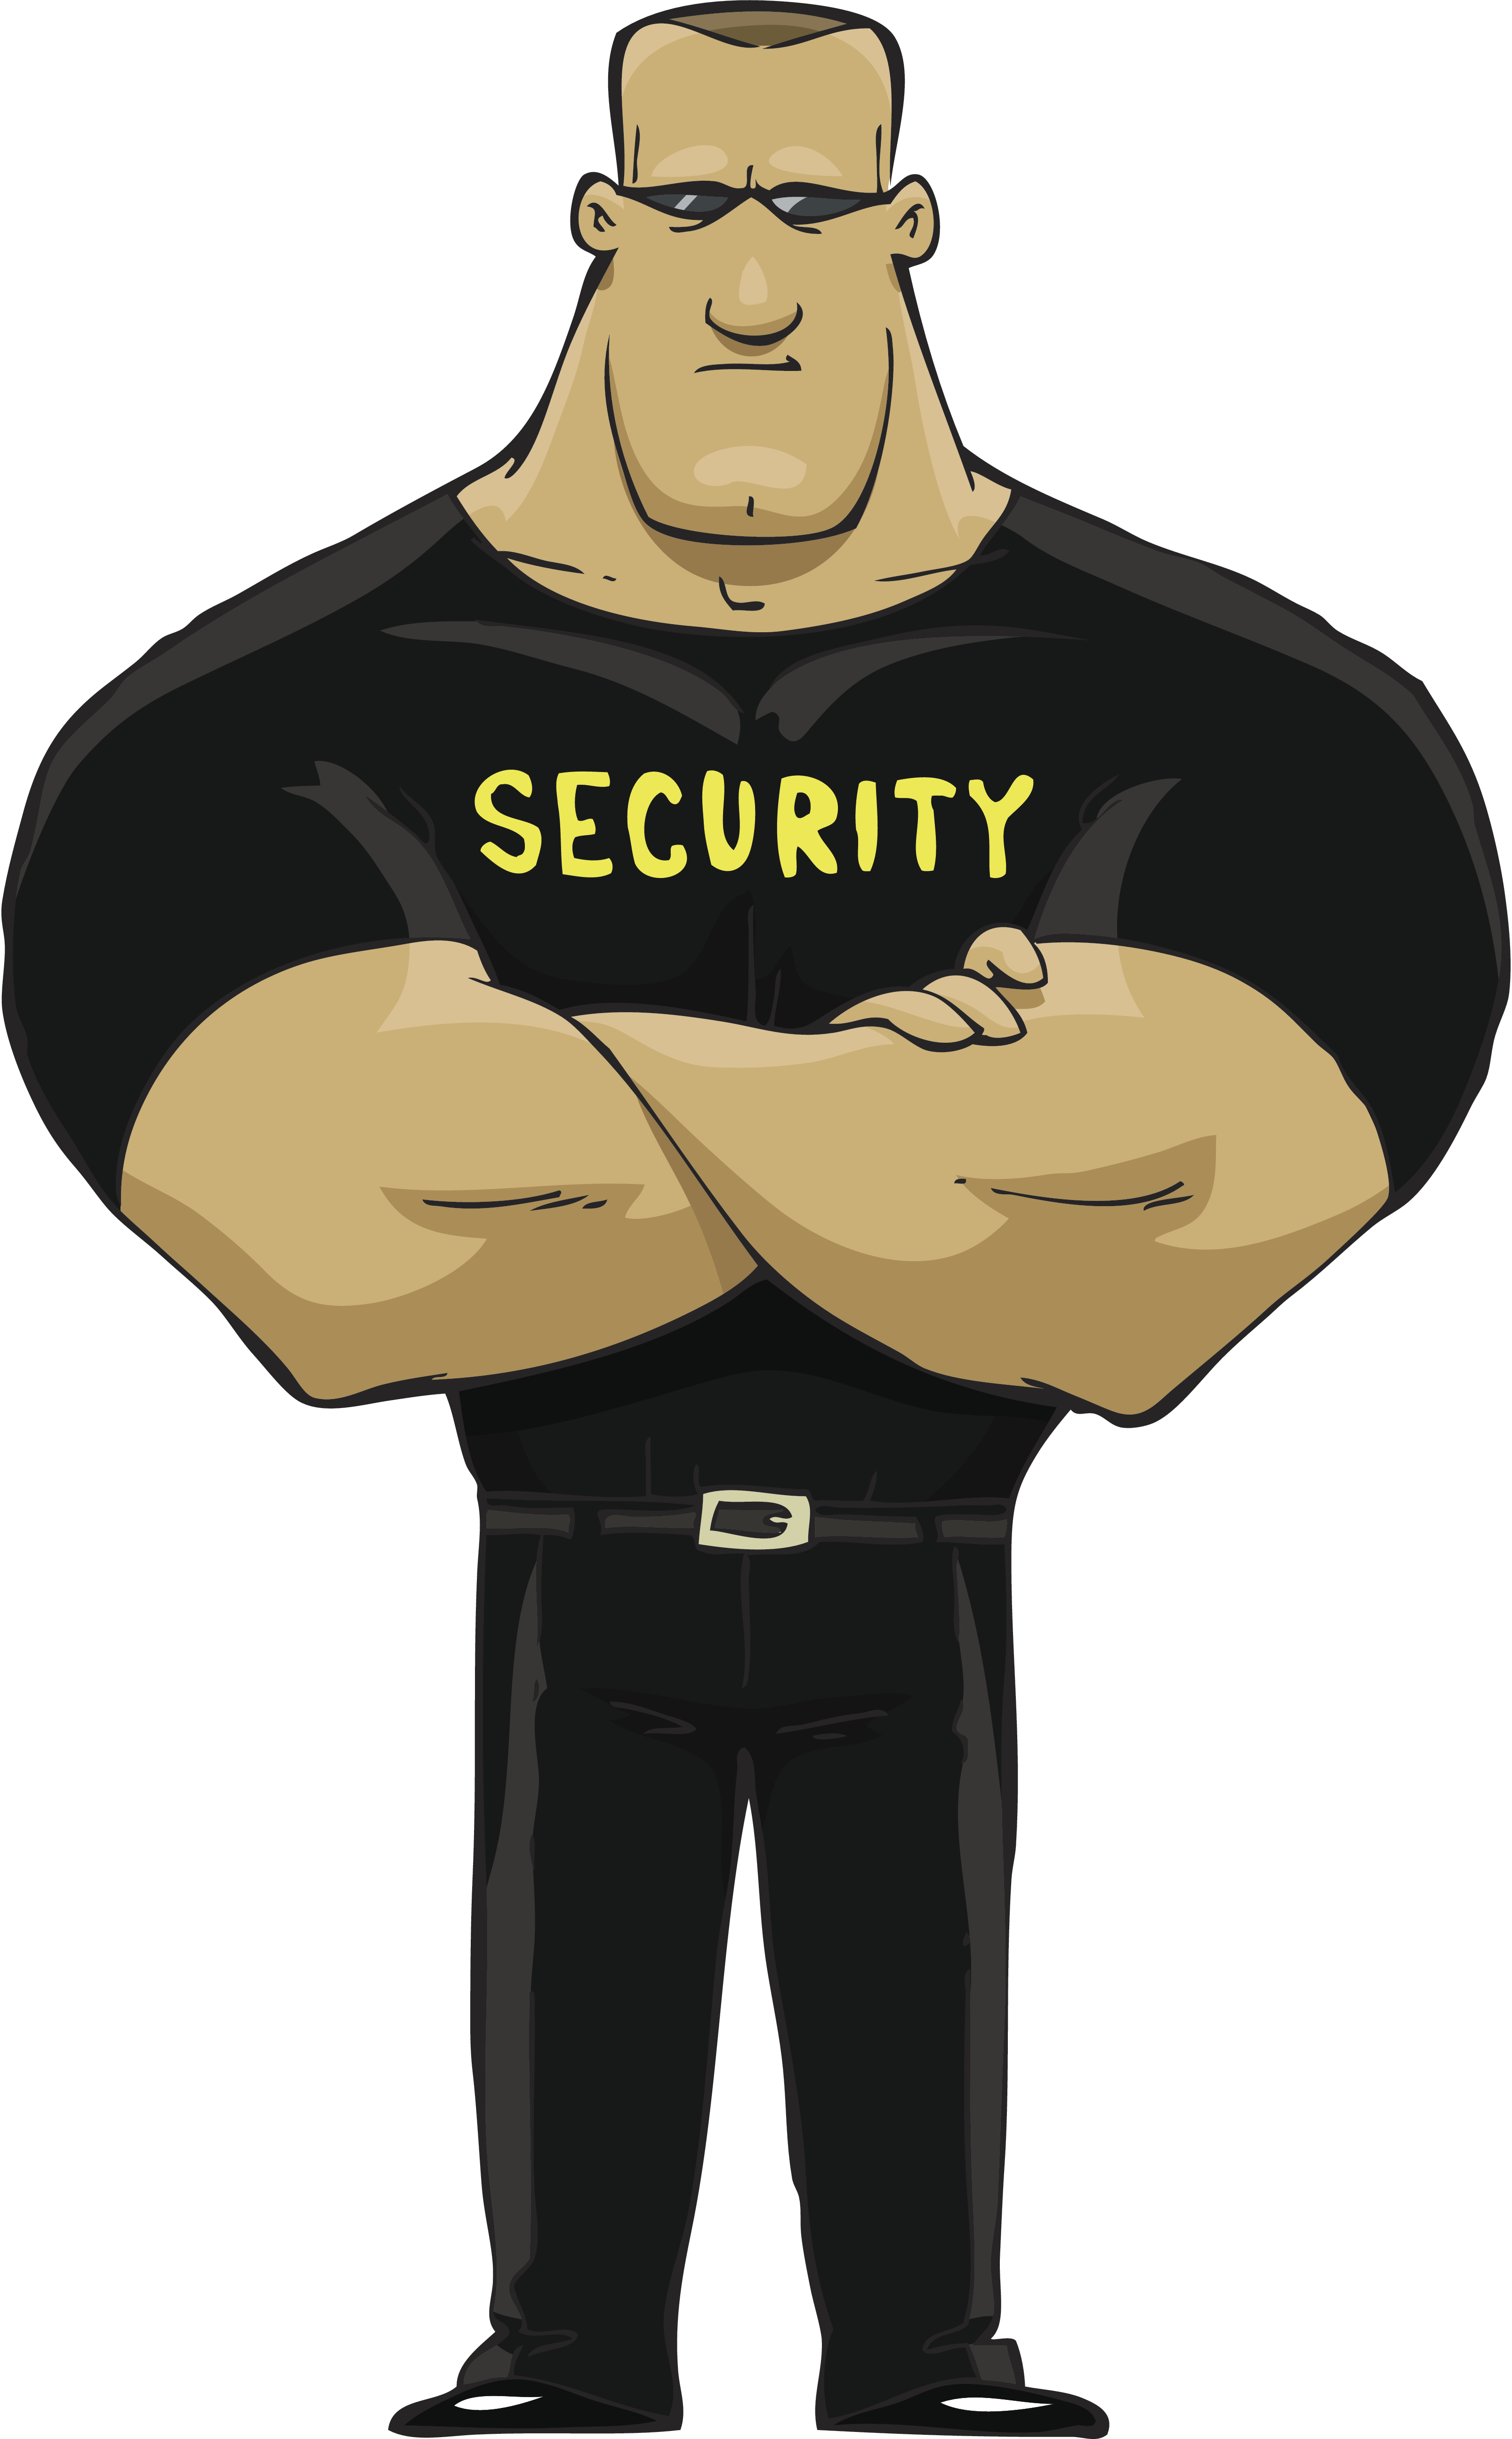 security clipart images - photo #46